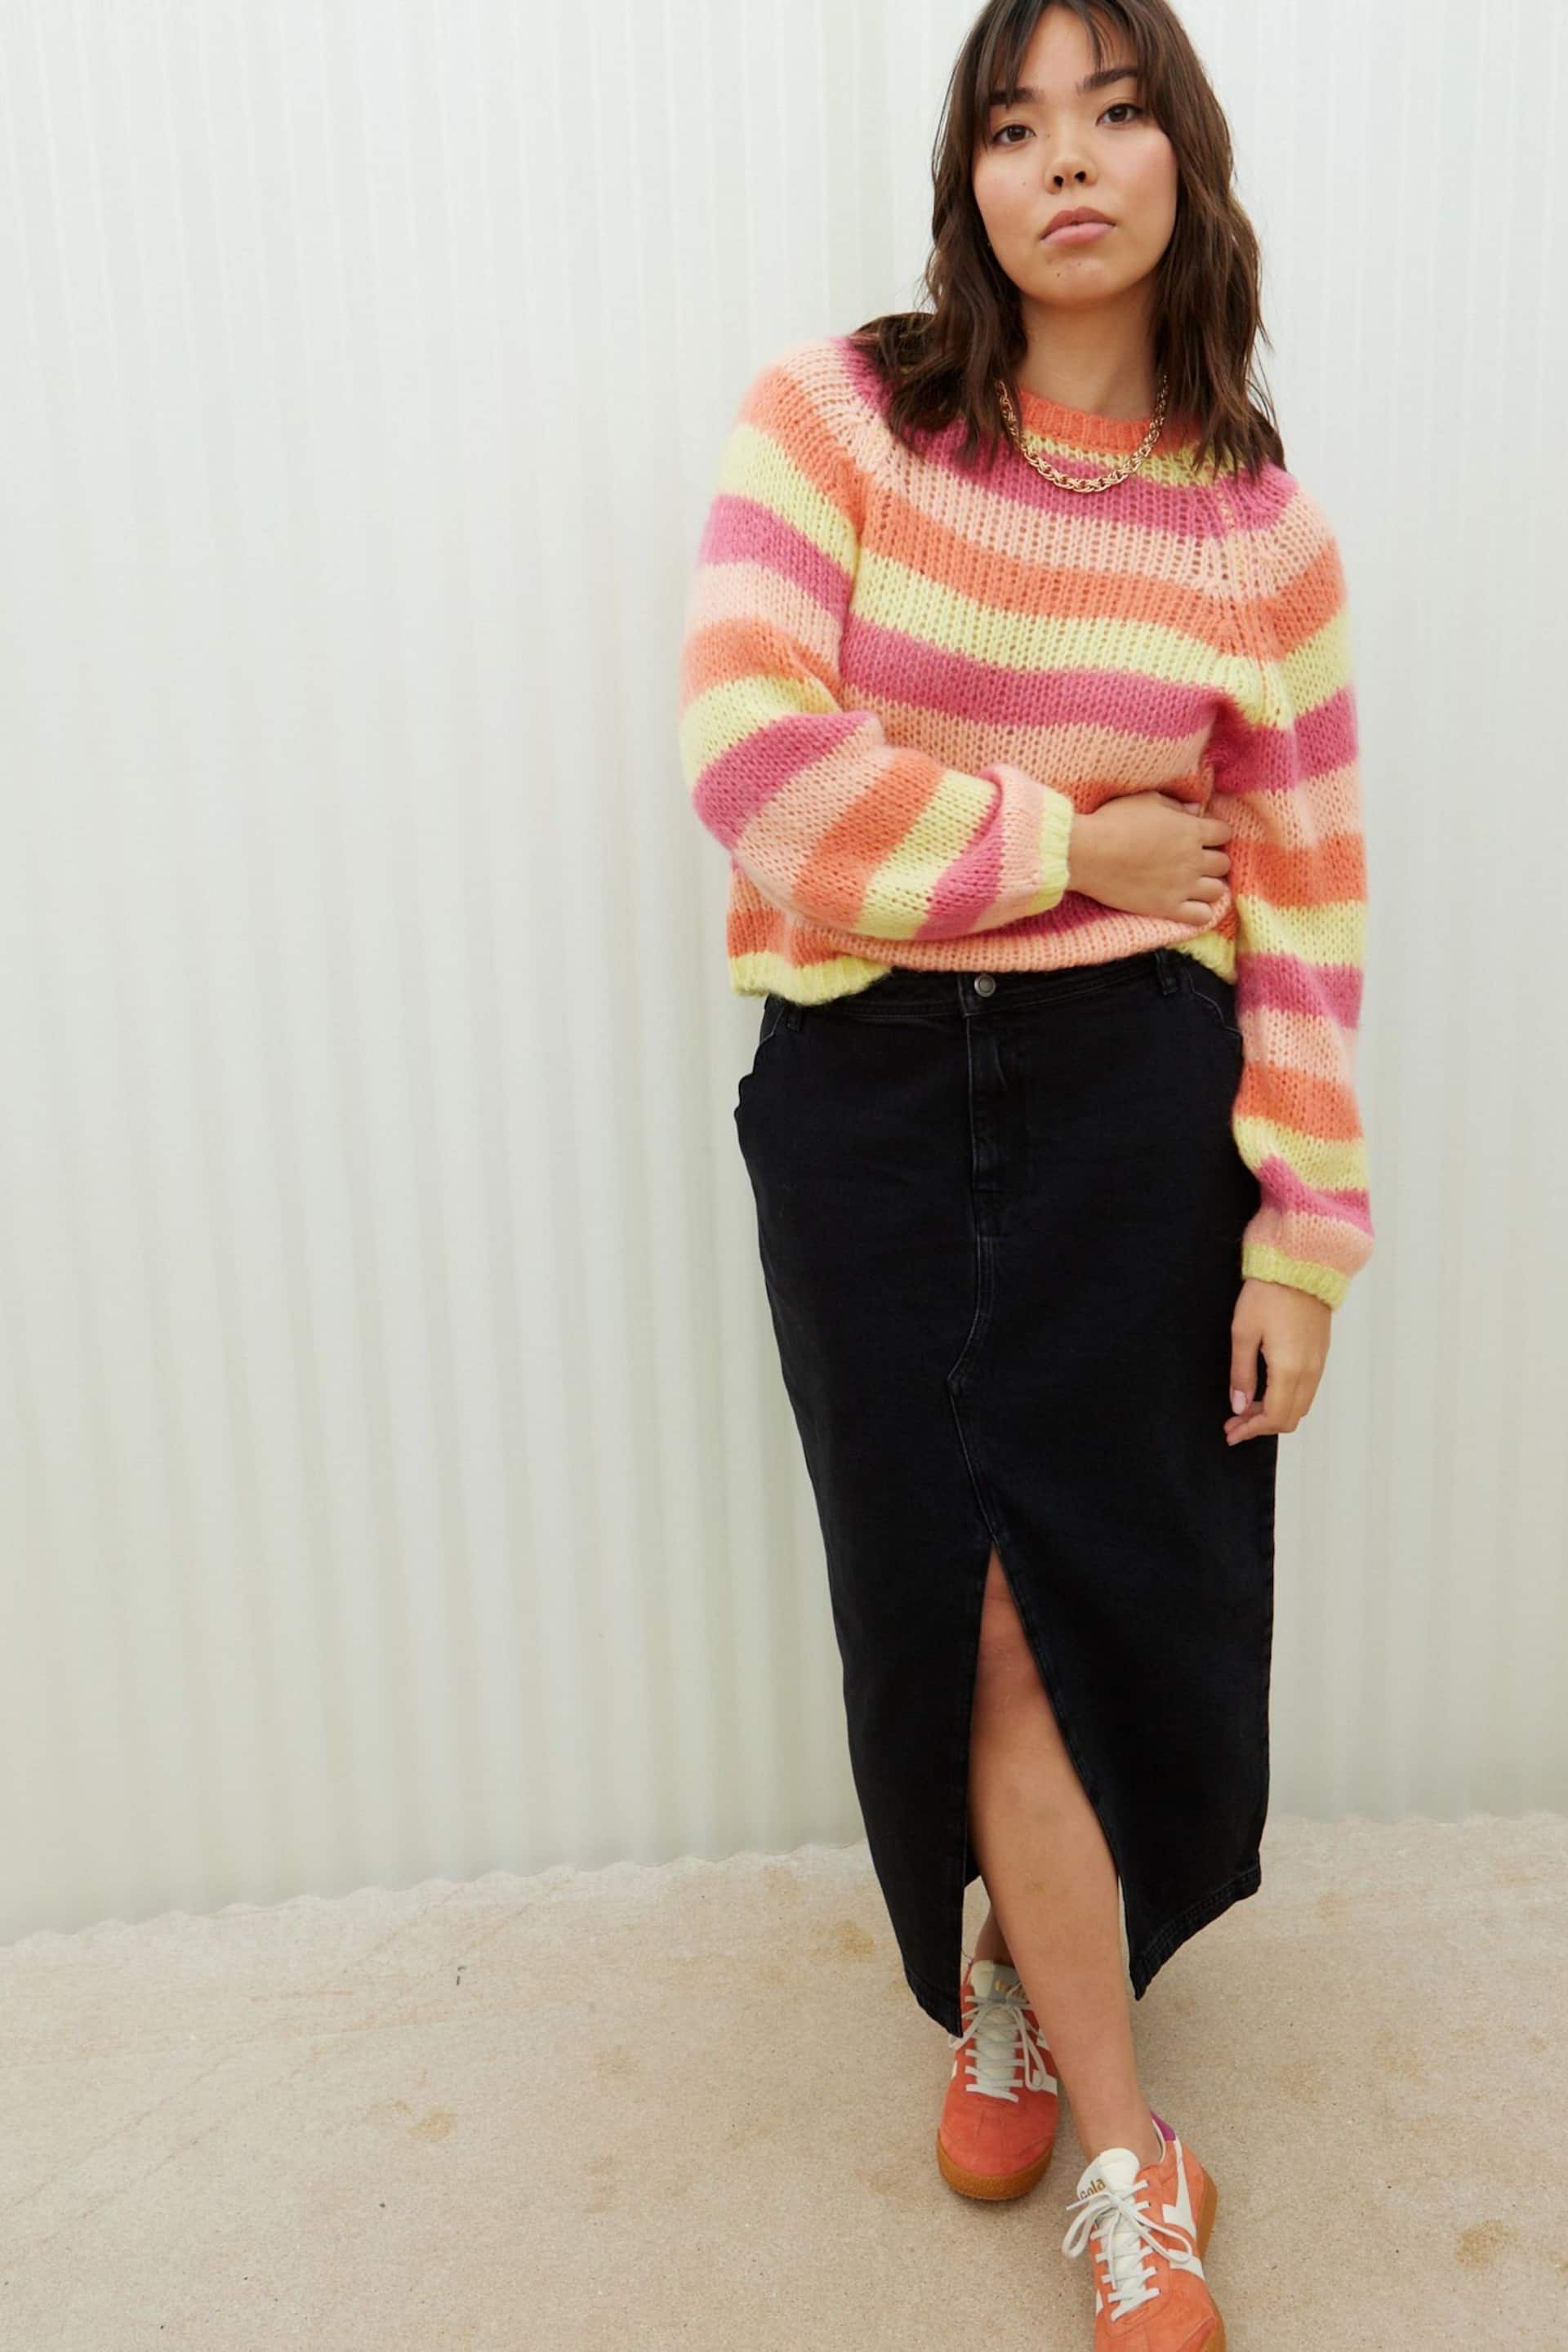 Oliver Bonas Multi Striped Lofty Knitted Jumper - Image 3 of 8